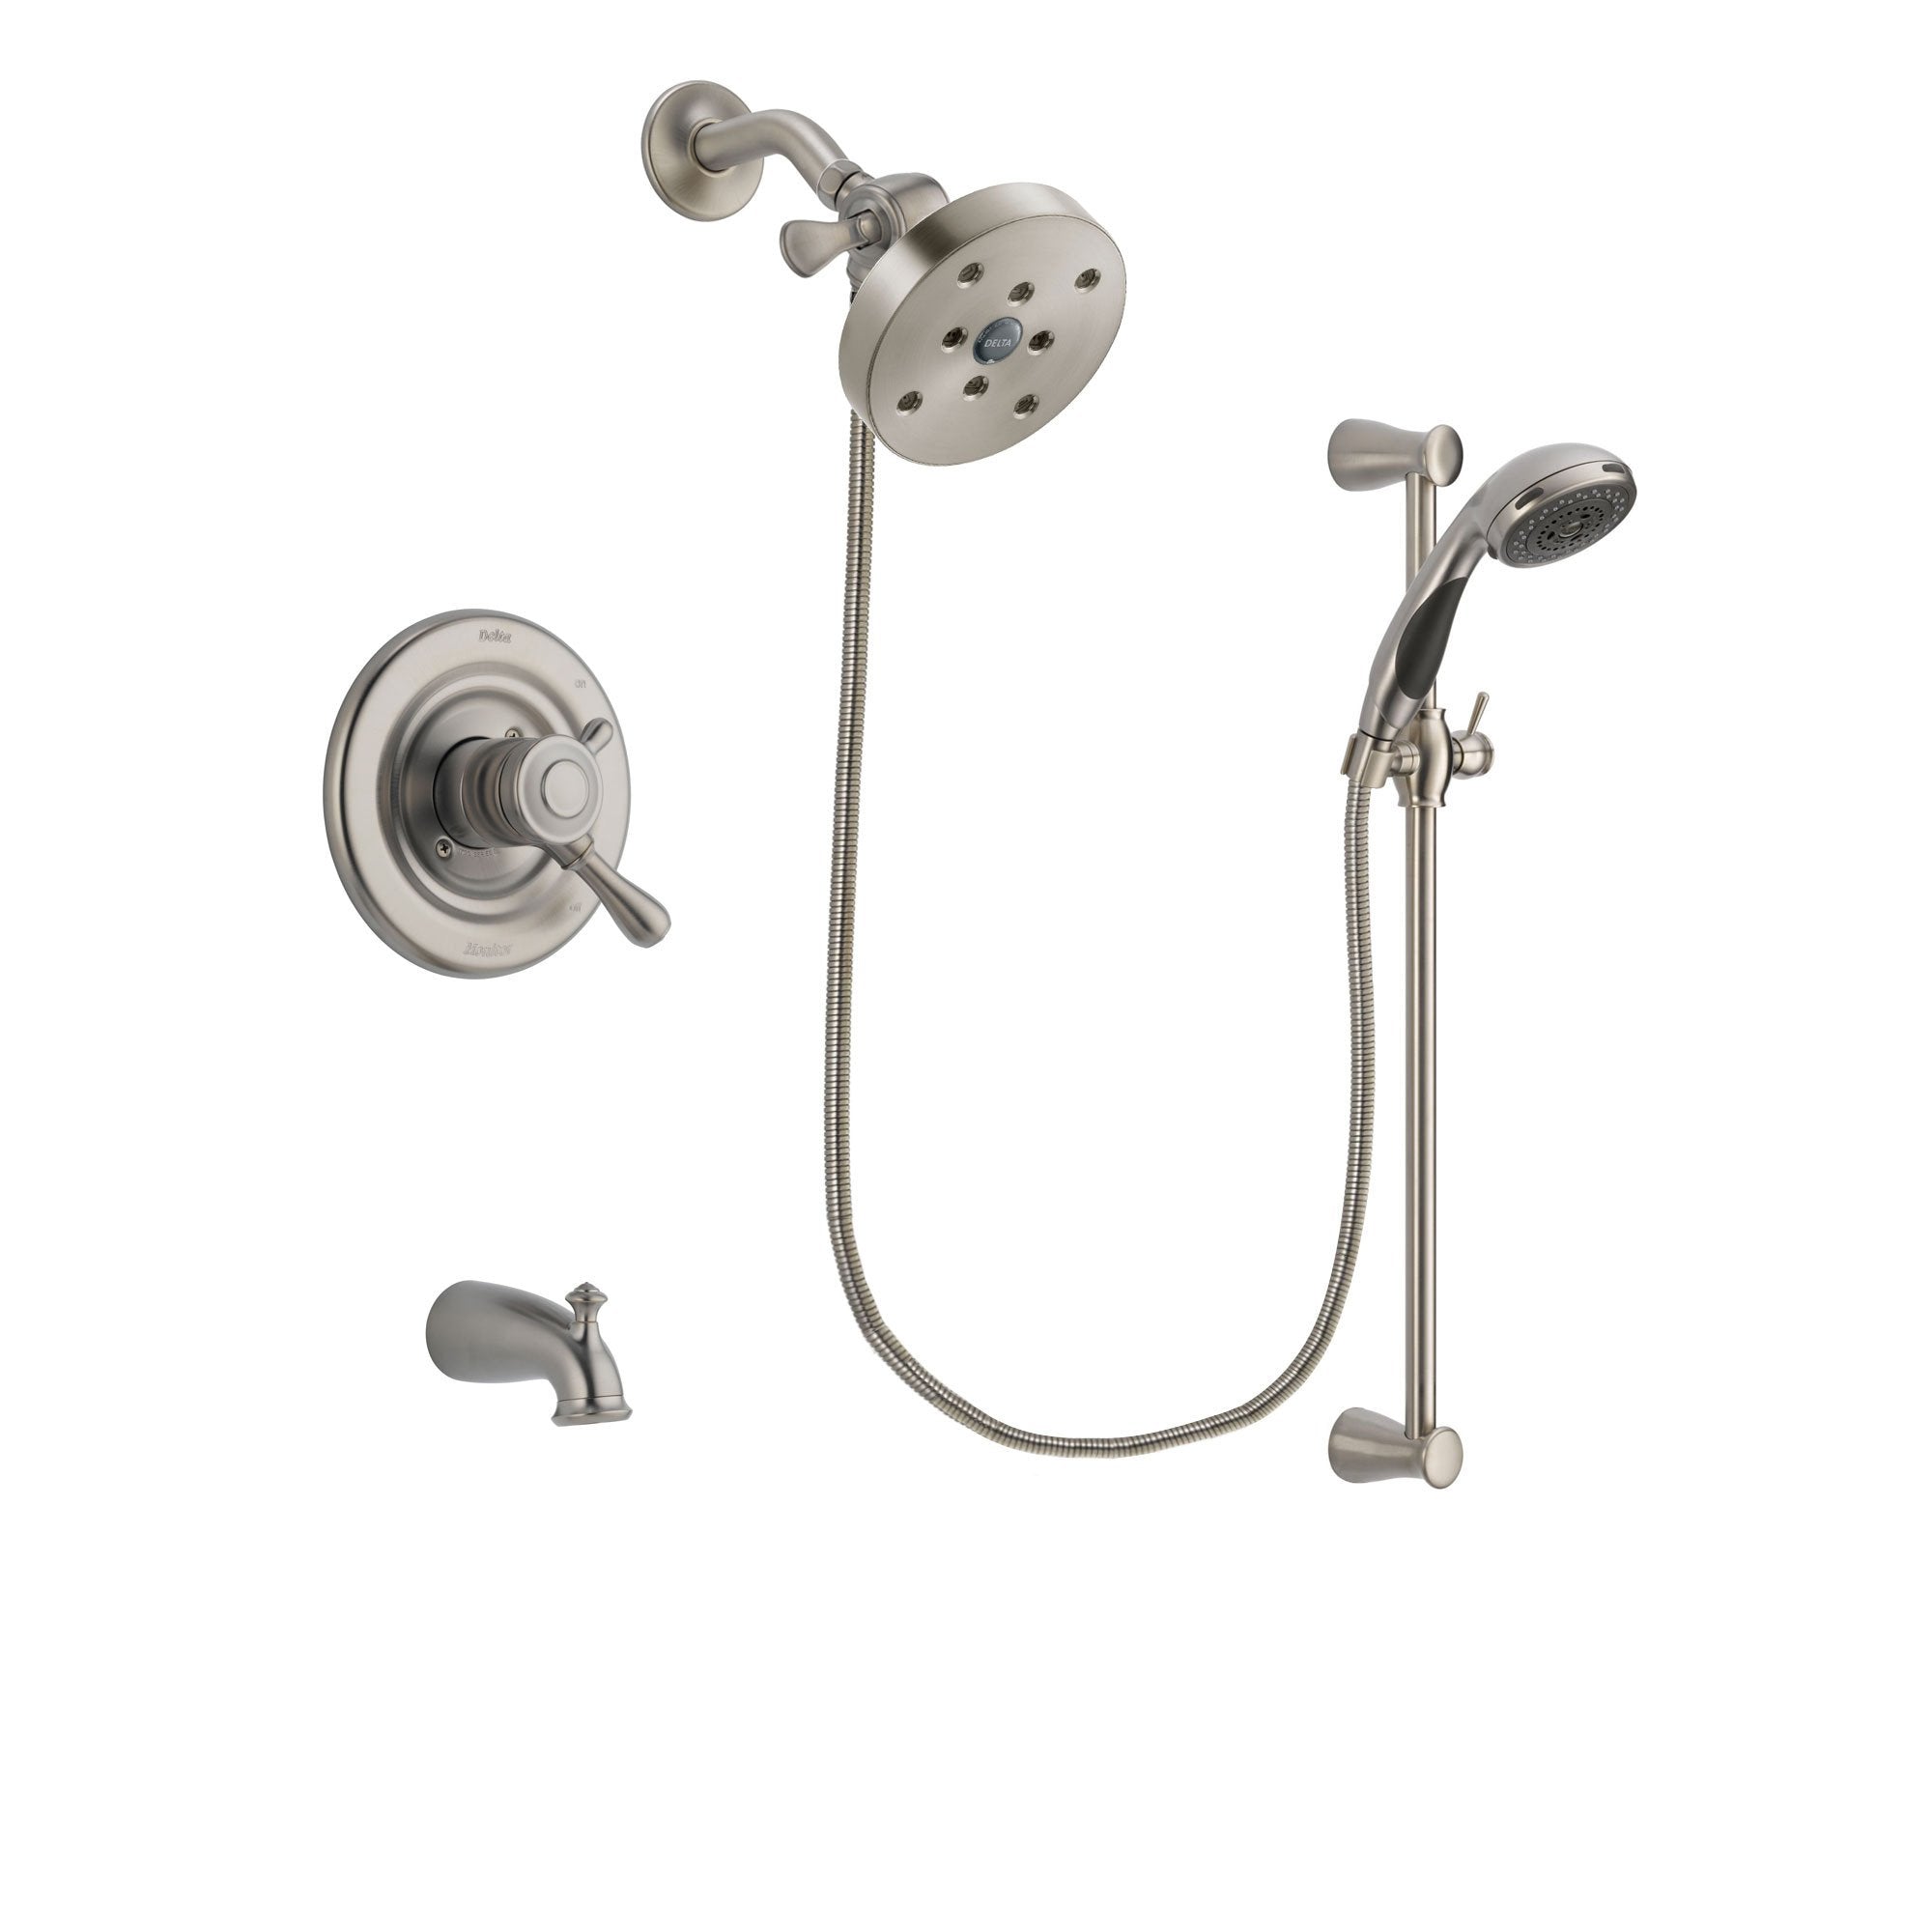 Delta Leland Stainless Steel Finish Dual Control Tub and Shower Faucet System Package with 5-1/2 inch Shower Head and Handheld Shower Spray with Slide Bar Includes Rough-in Valve and Tub Spout DSP1641V